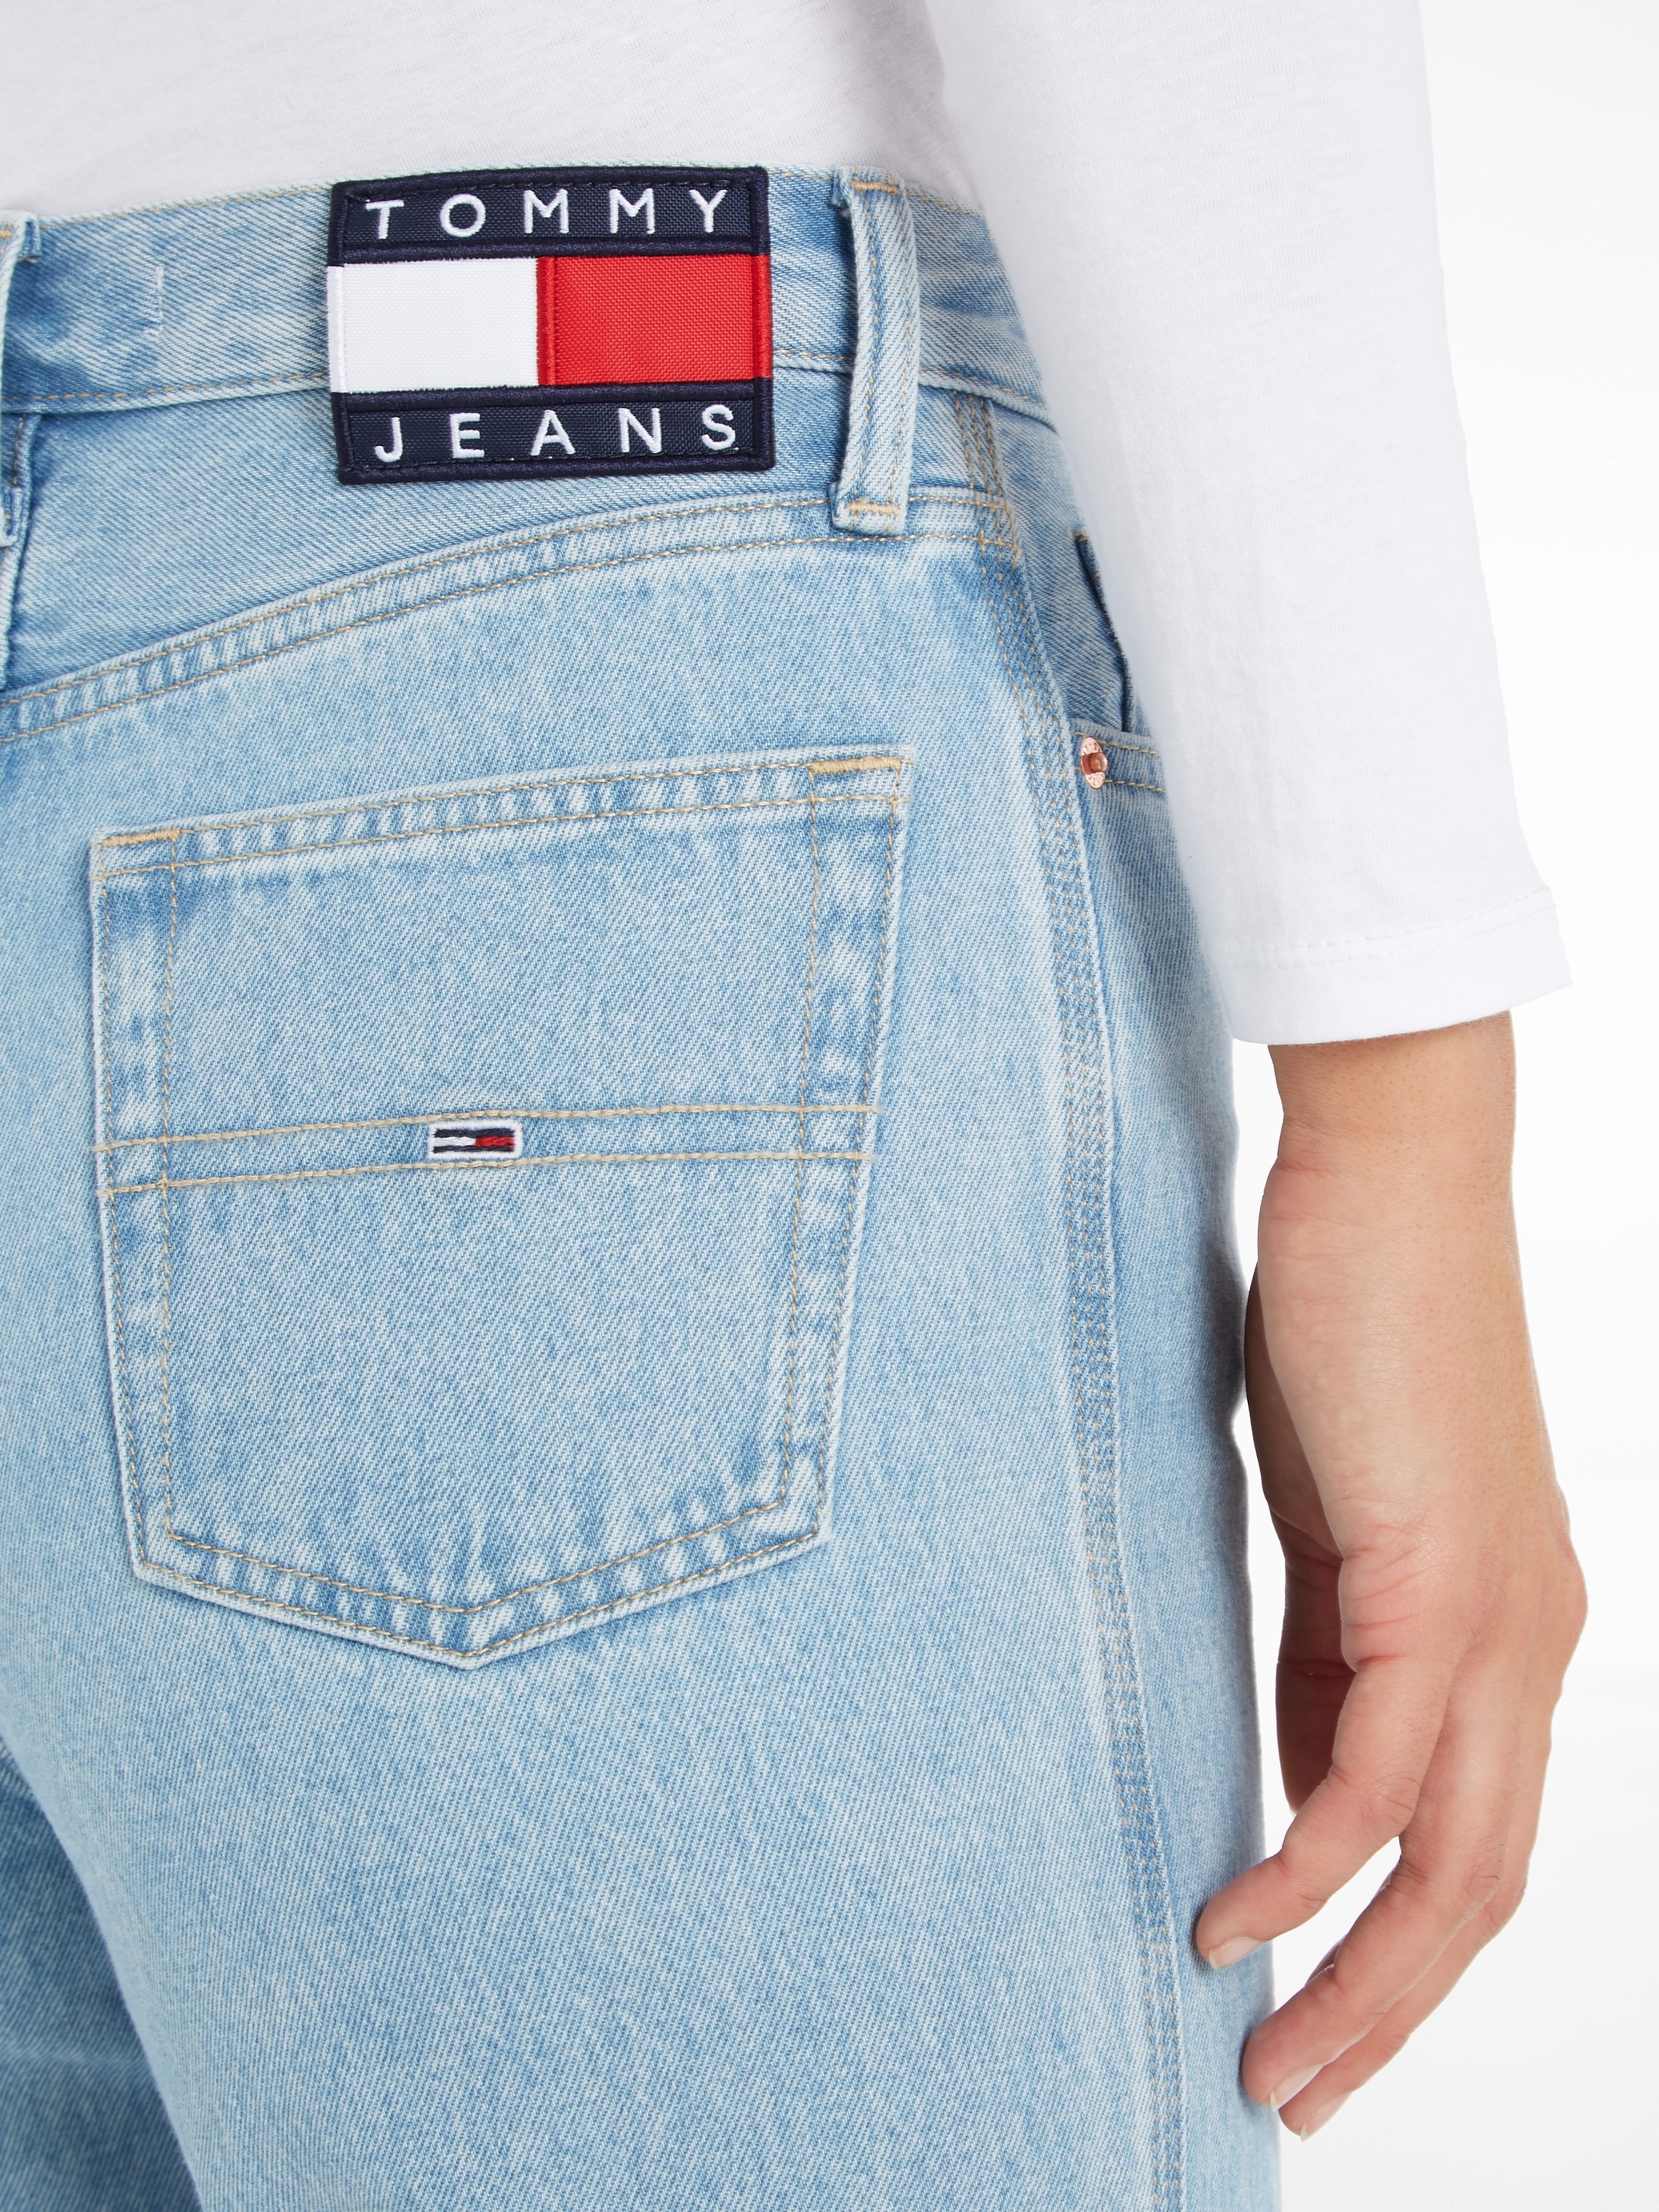 Jeans Jeans, Jeans mit Tommy Weite bei Tommy OTTO online Logobadges